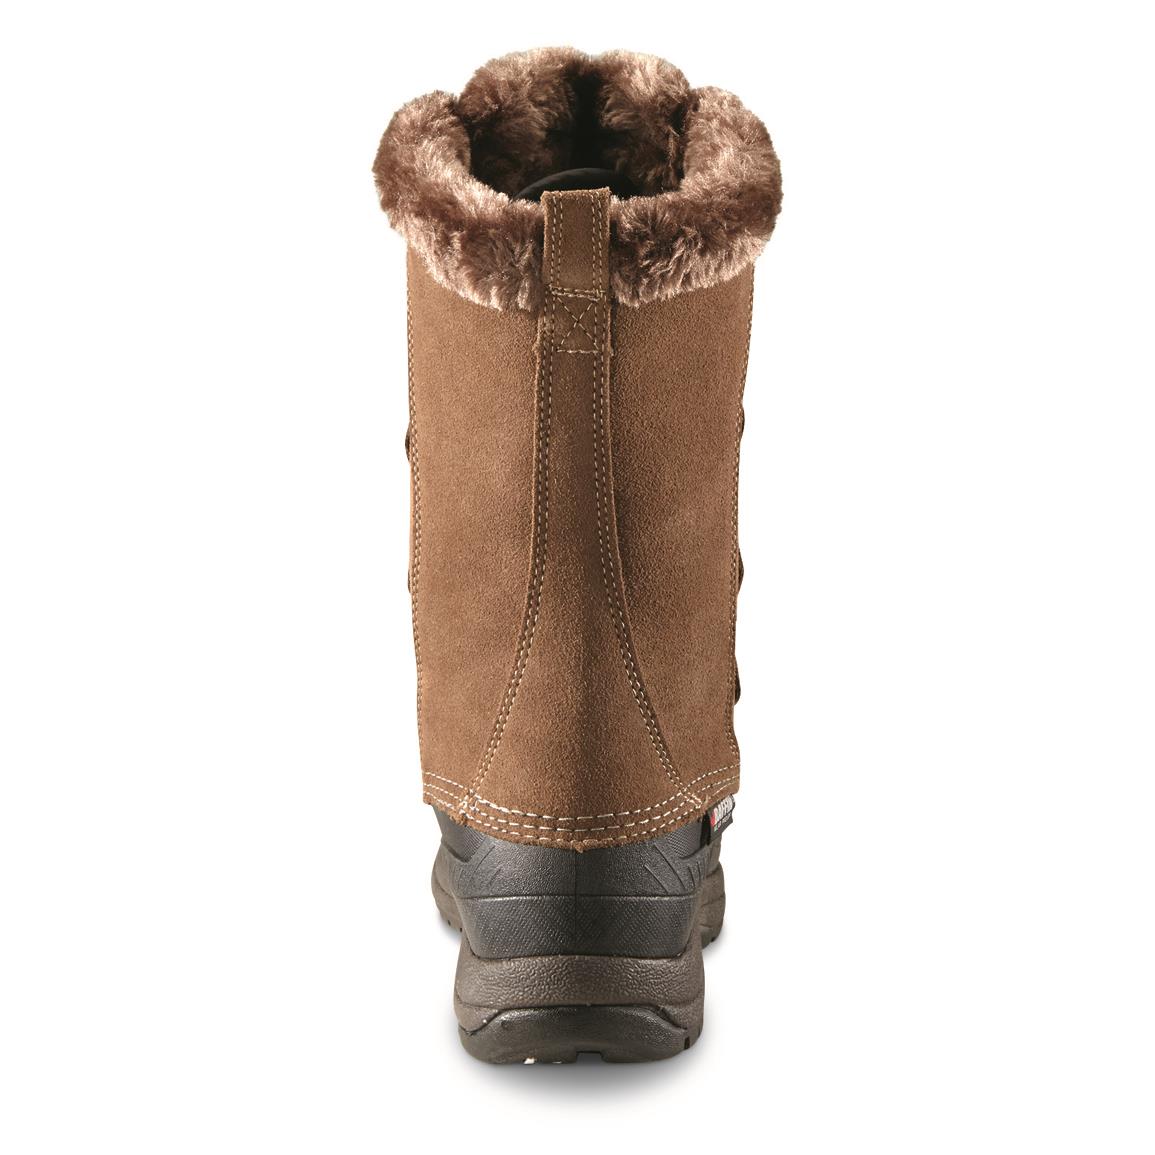 Womens Removable Liner Boots | Sportsman's Guide